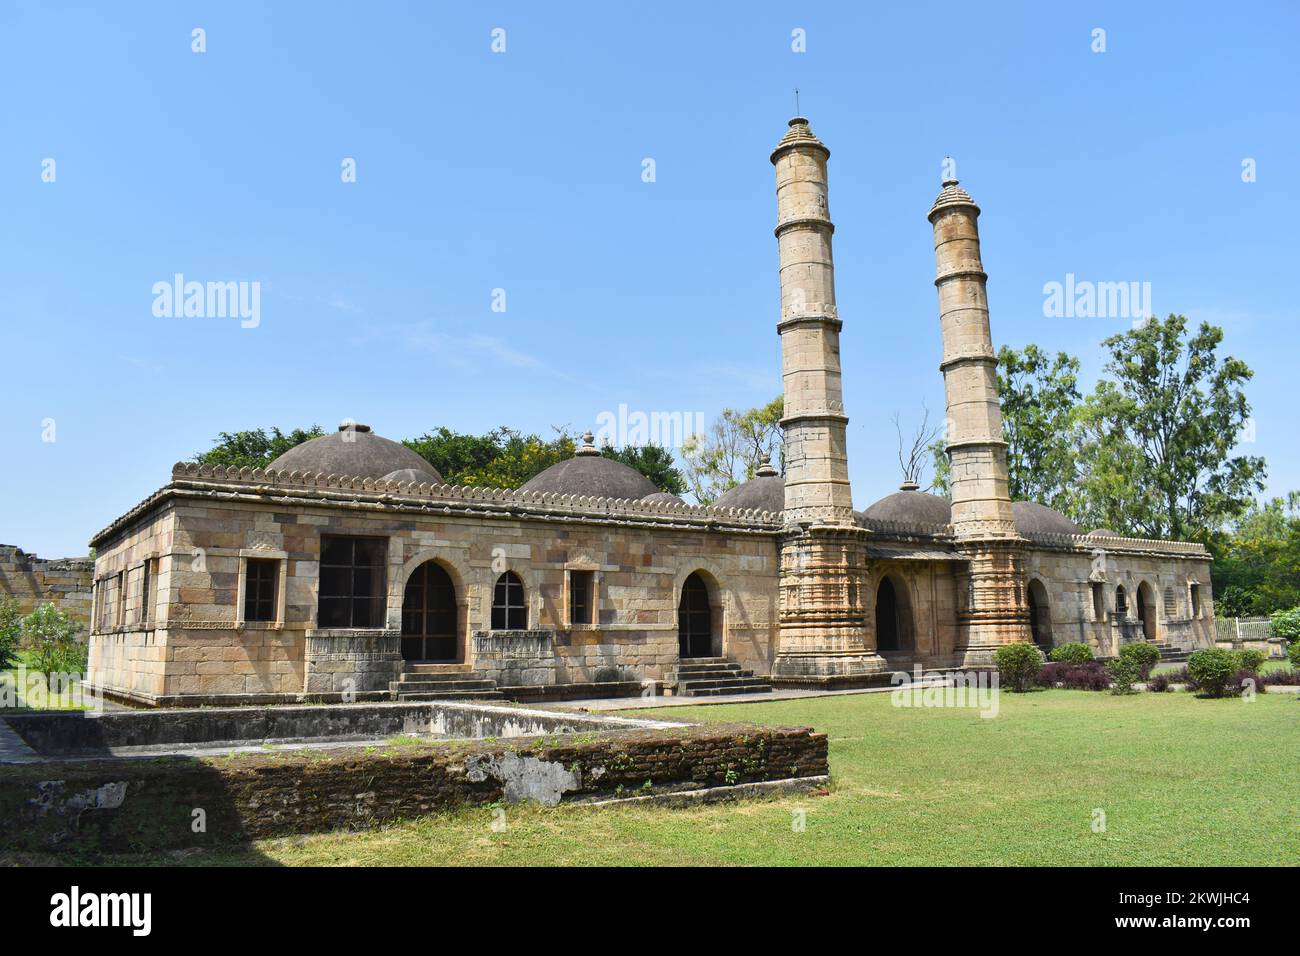 Rear view of Shaher ki Masjid, Islamic religious architecture, was built by Sultan Mahmud Begada 15th - 16th century. A UNESCO World Heritage Site in Stock Photo